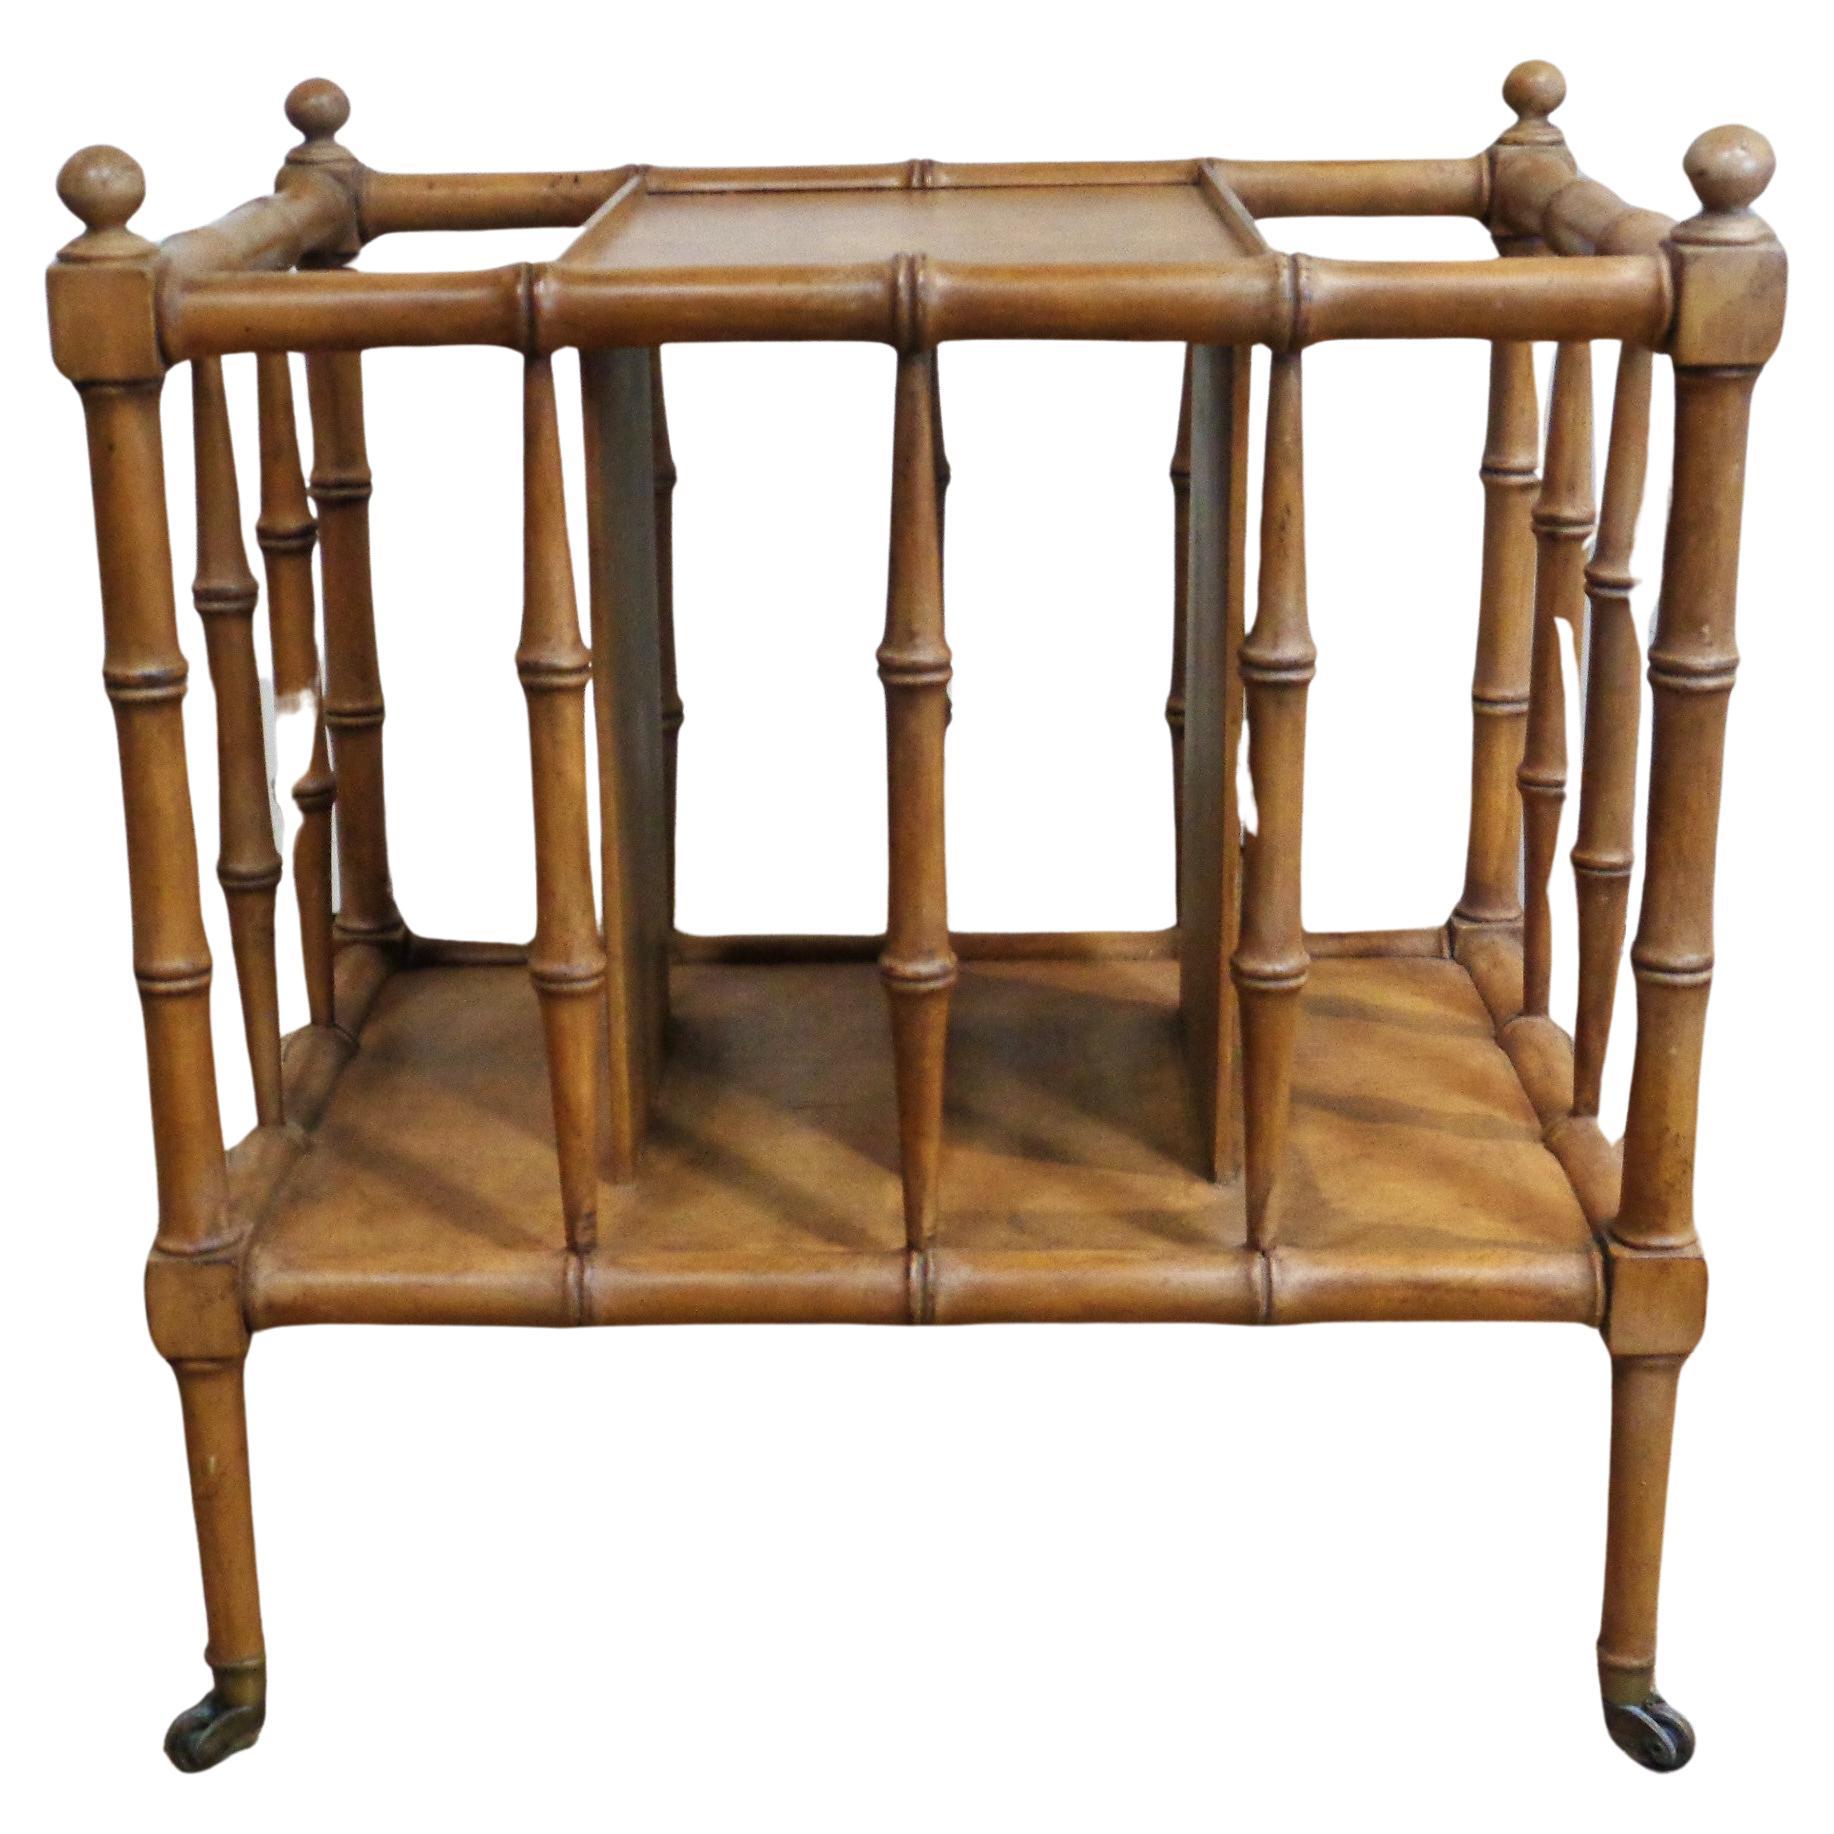 English Regency style faux bamboo burlwood and walnut canterbury magazine rack with original brass cup rolling wheel casters. Overall nicely aged warm surface color to wood and brass. Attributed to Baker Furniture Company, Circa 1960's . Look at all